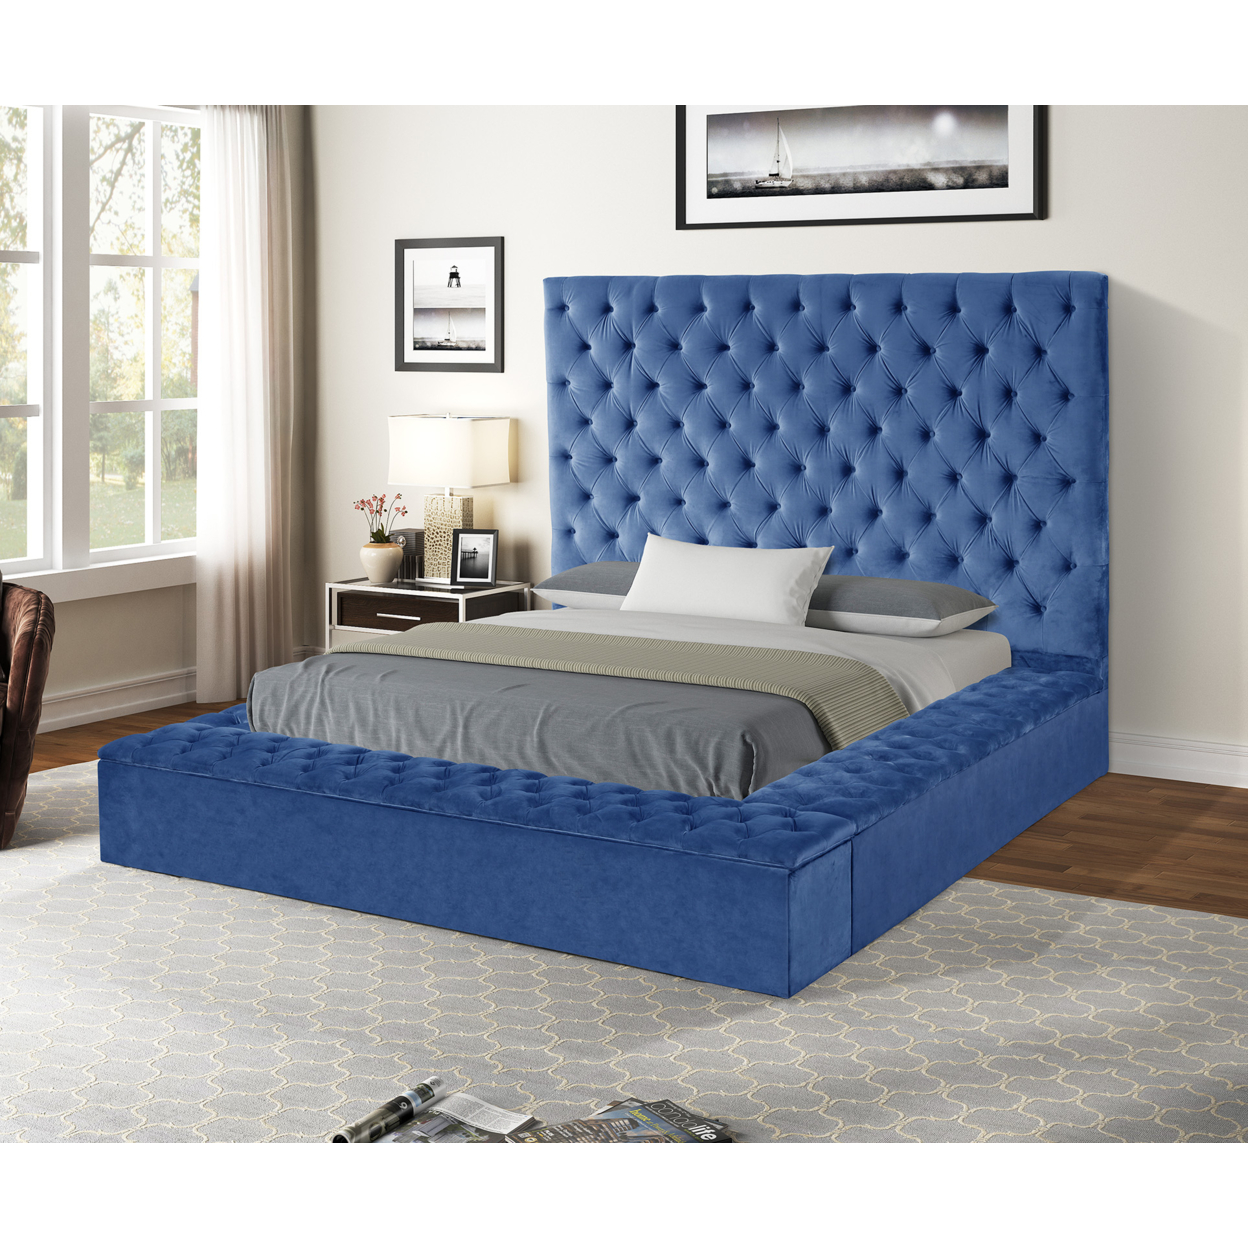 Nora Queen Size Tufted Upholstery Storage Bed made with Wood in Blue